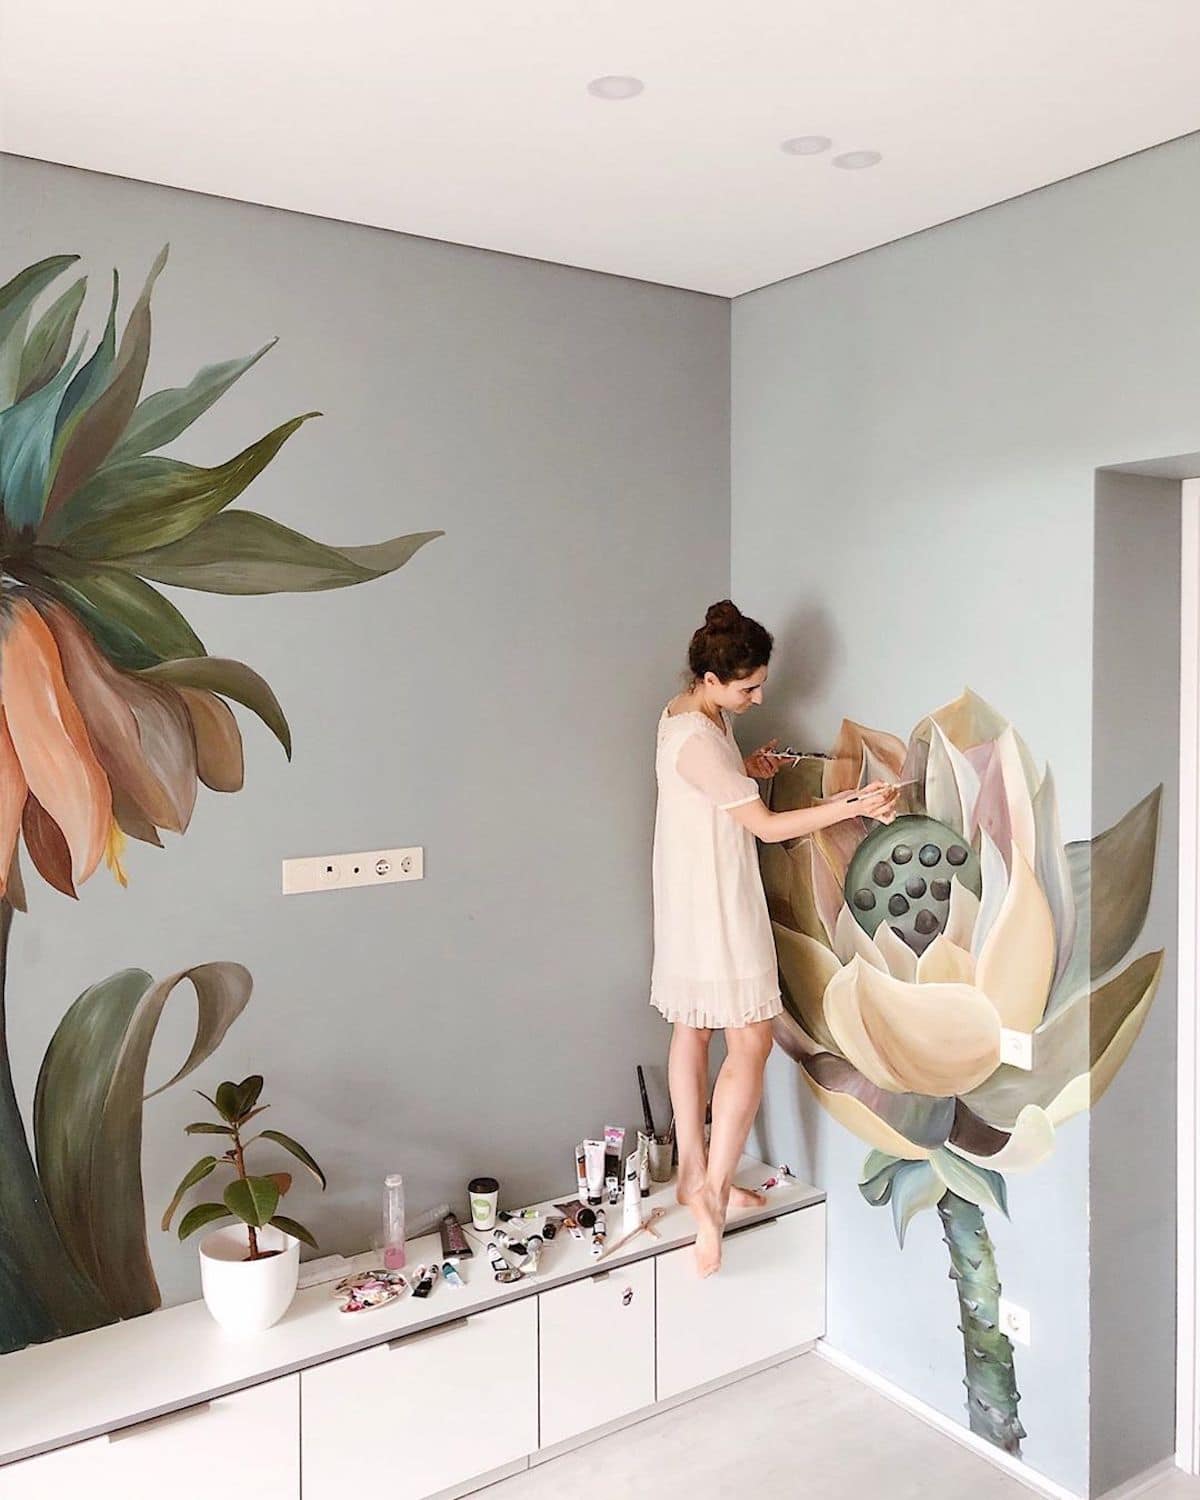 Flower Mural Wall Art by Lilit Sargsyan